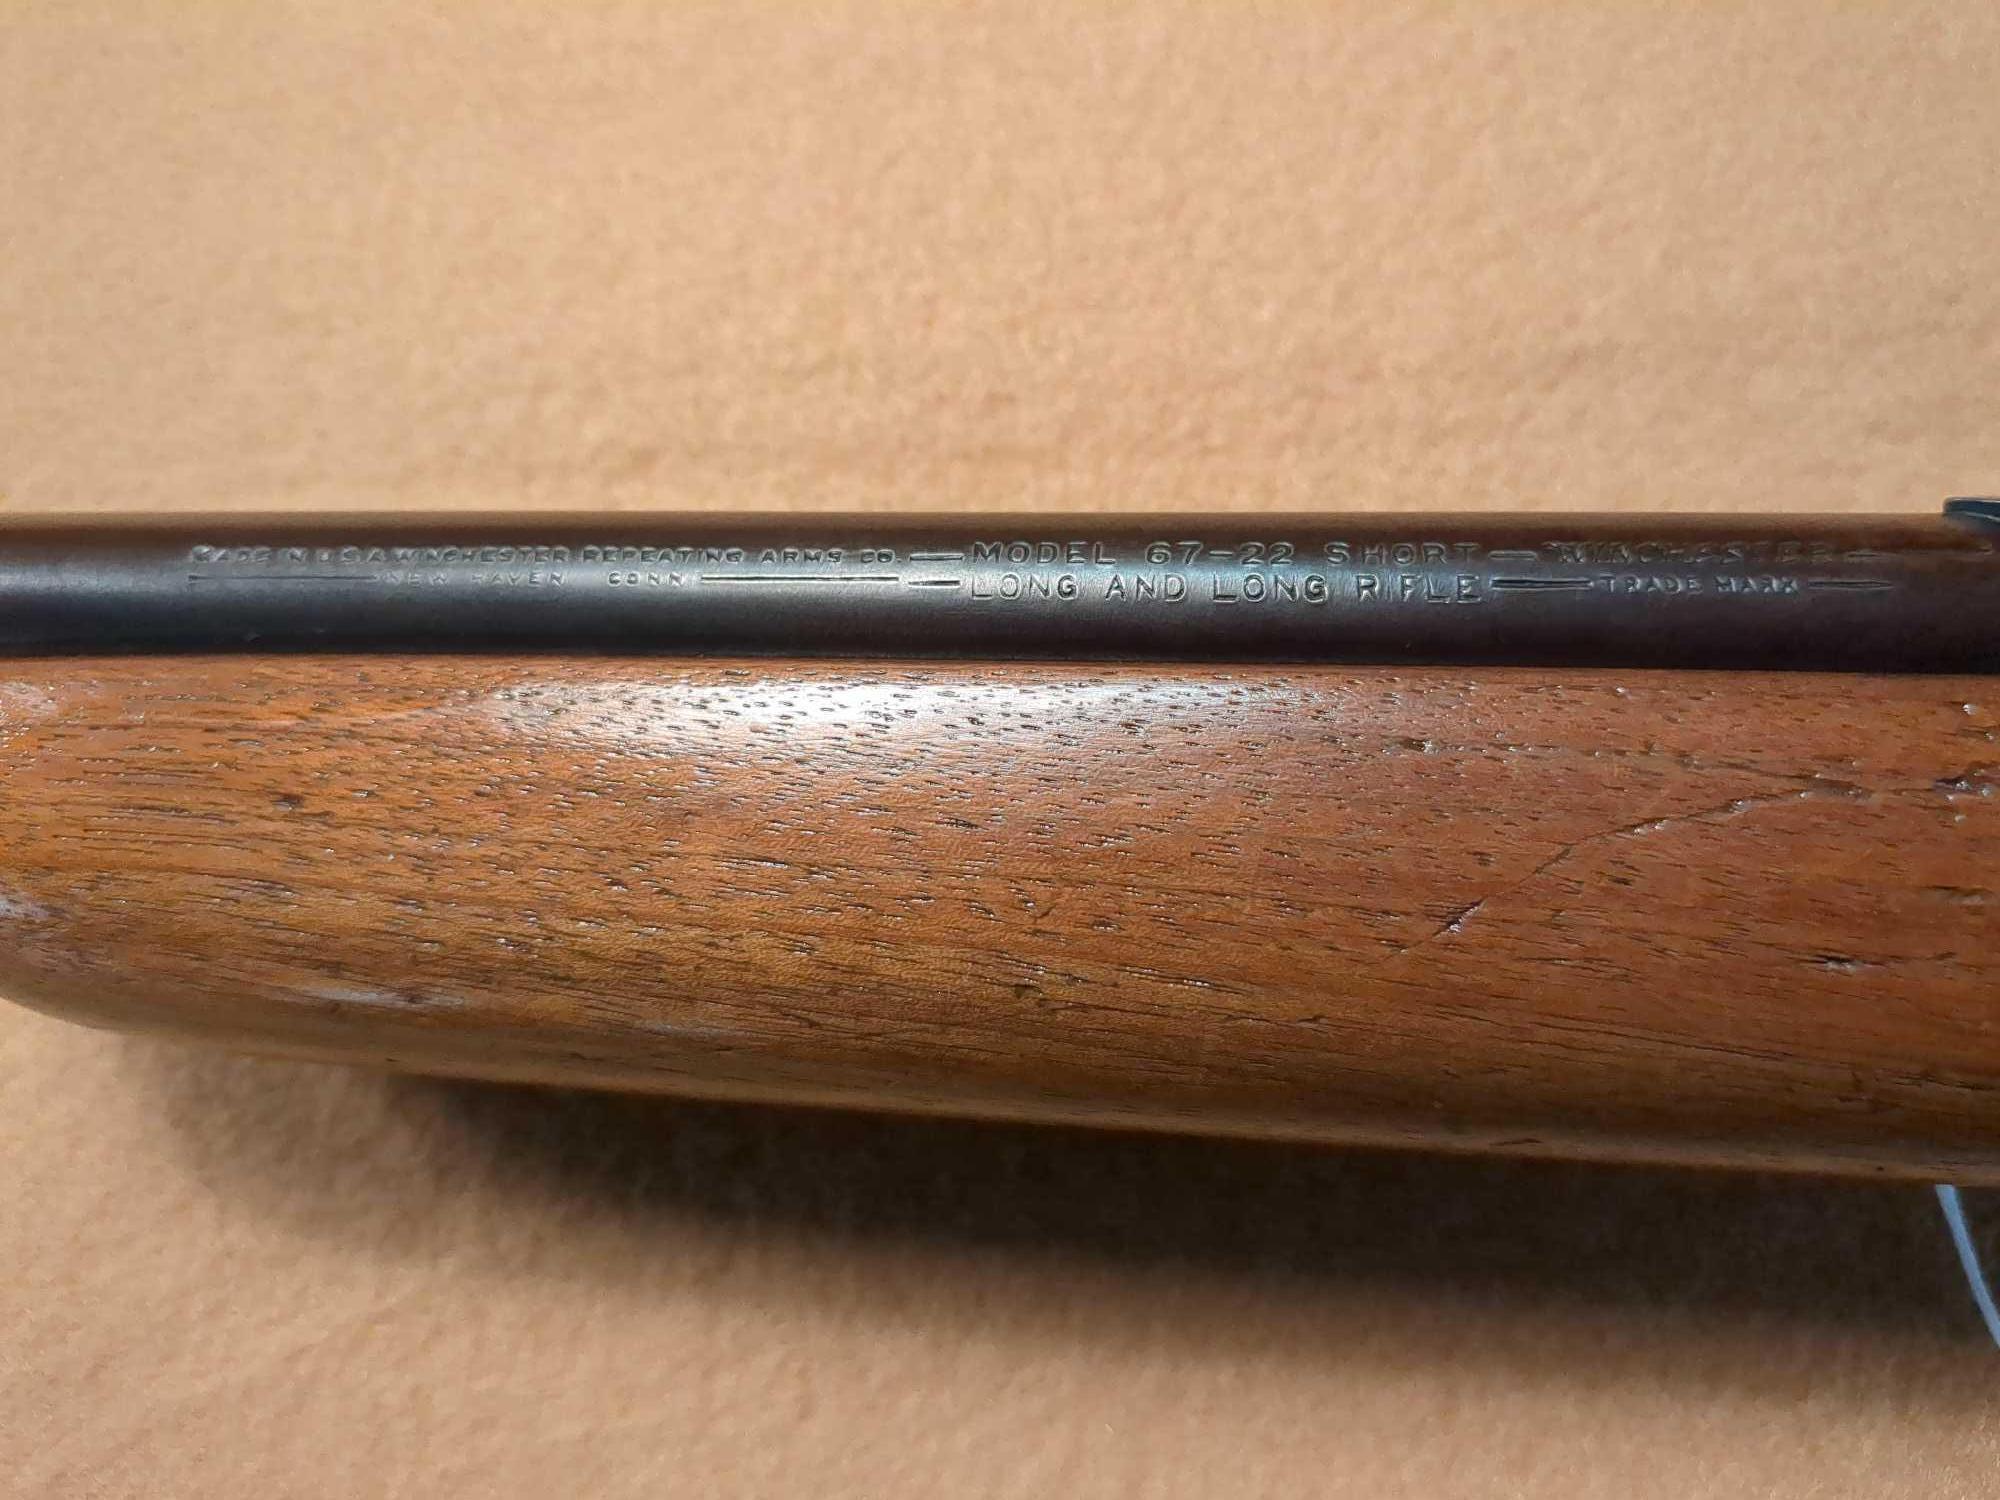 WINCHESTER REPEATING ARMS CO. MODEL 67 .22 S L LR SINGLE SHOT BOLT ACTION RIFLE